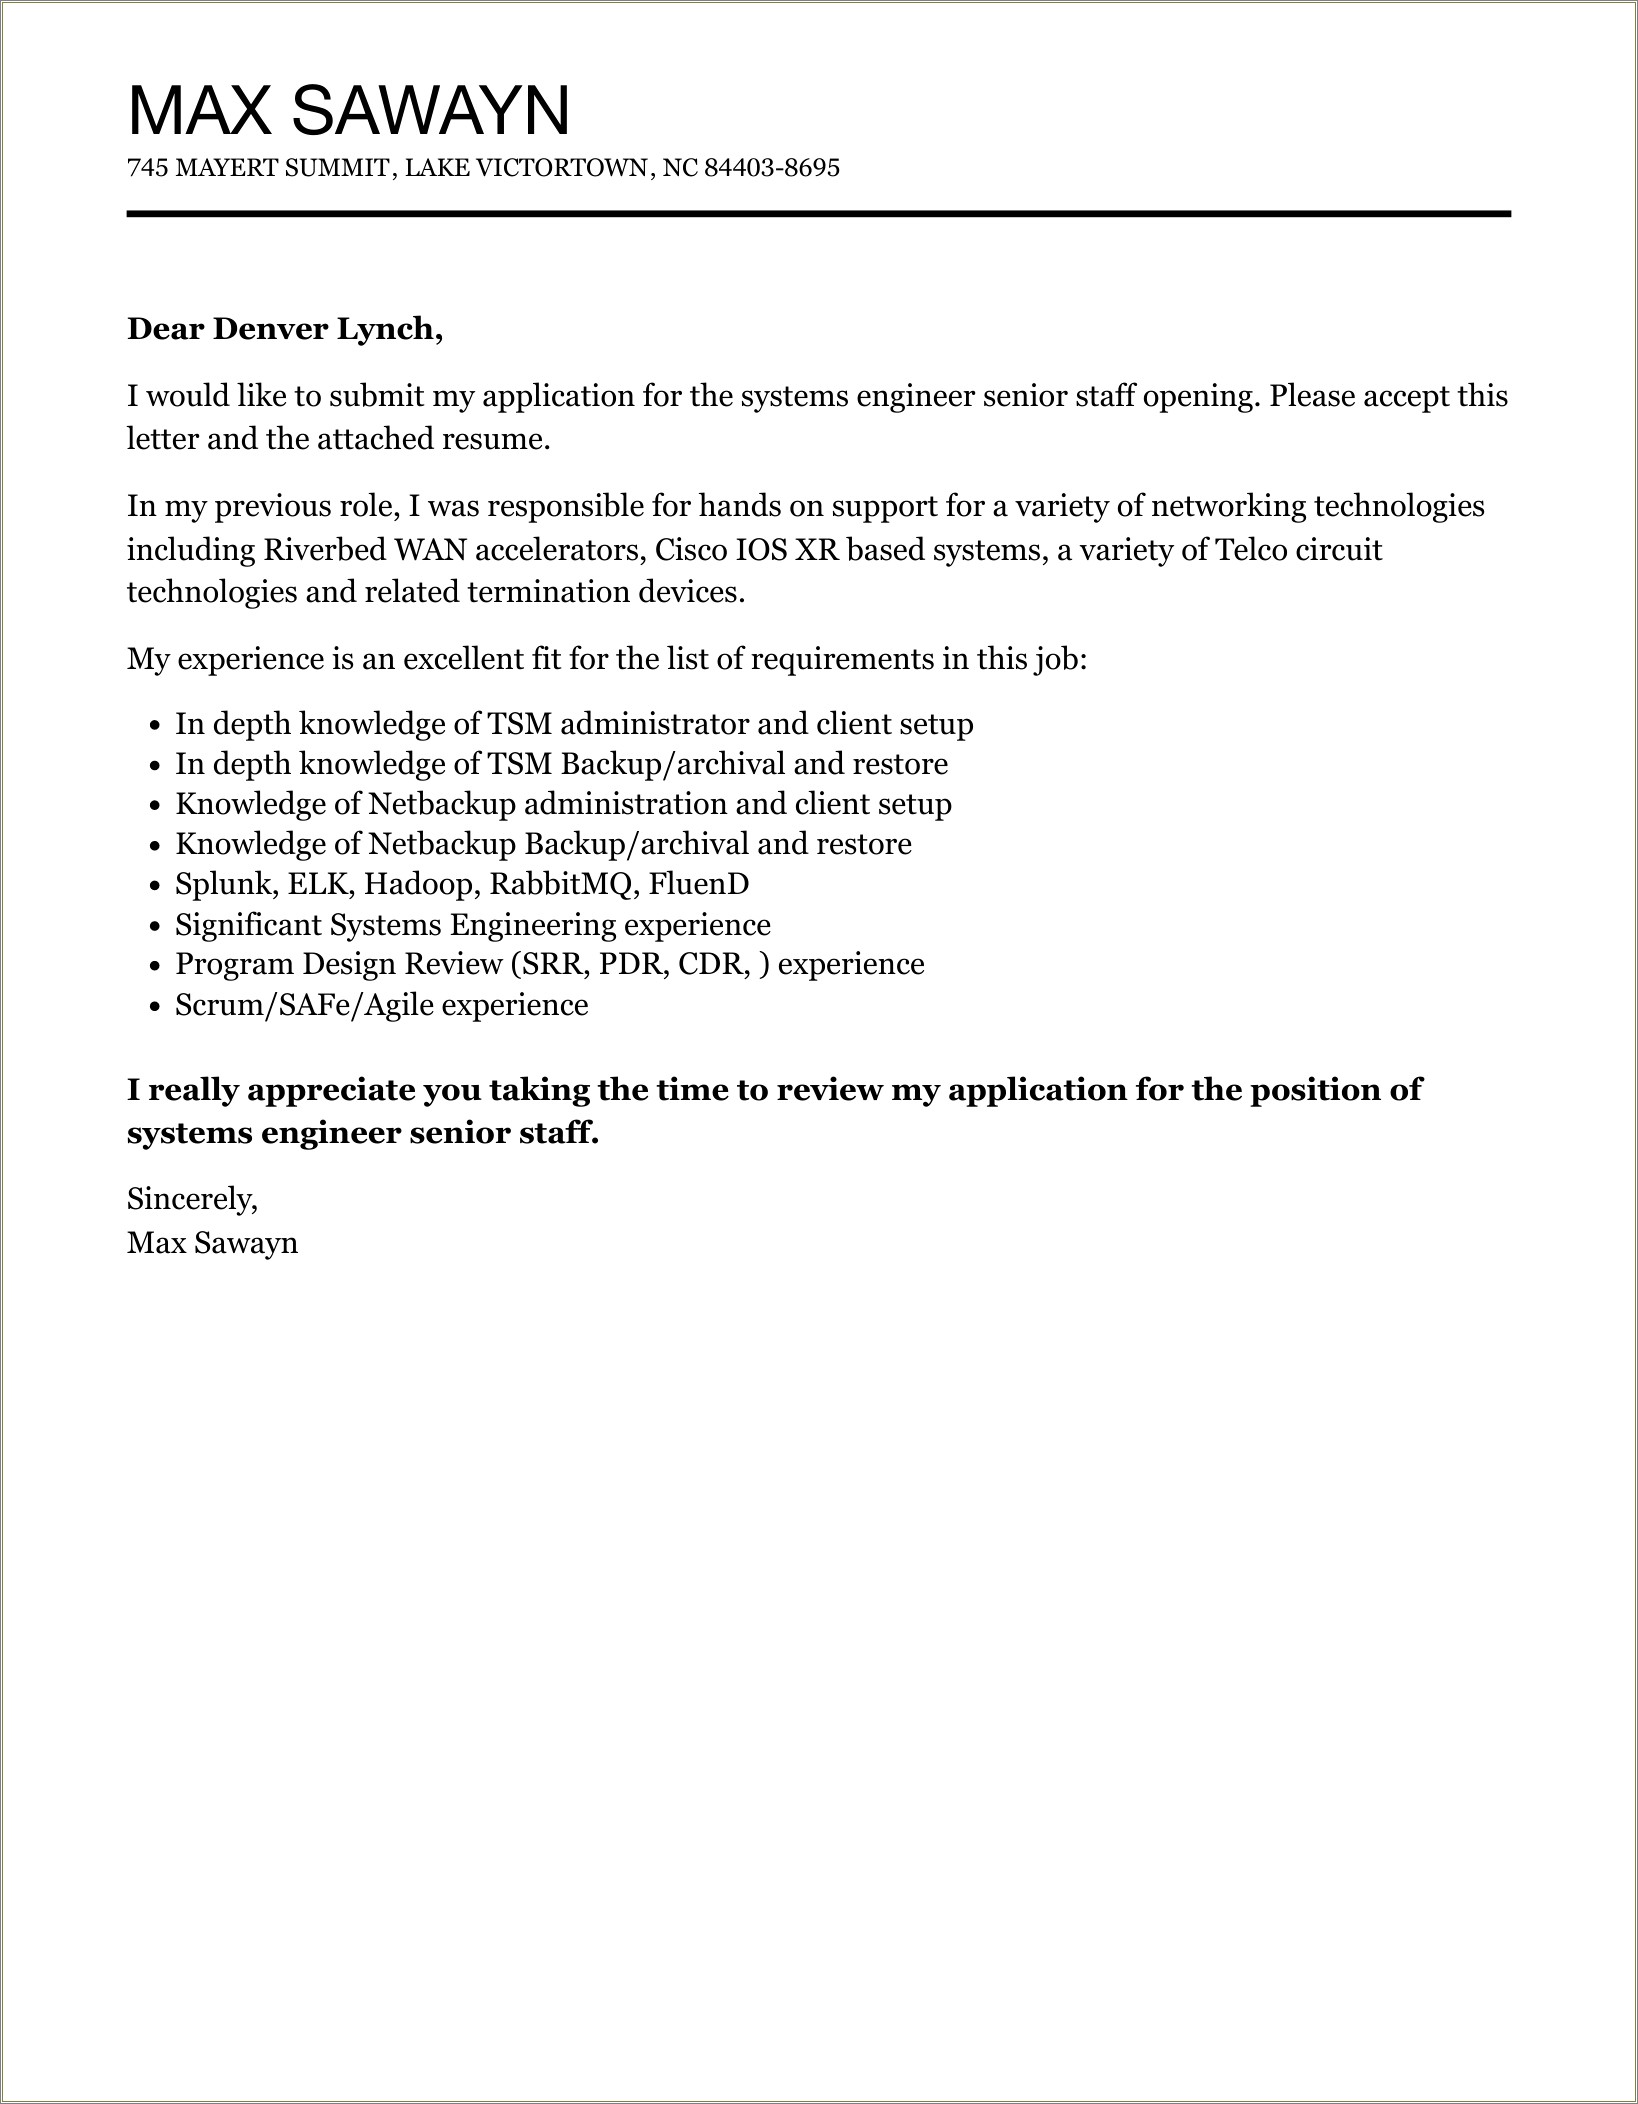 Resume And Cover Letter Sample For Archiving Staff